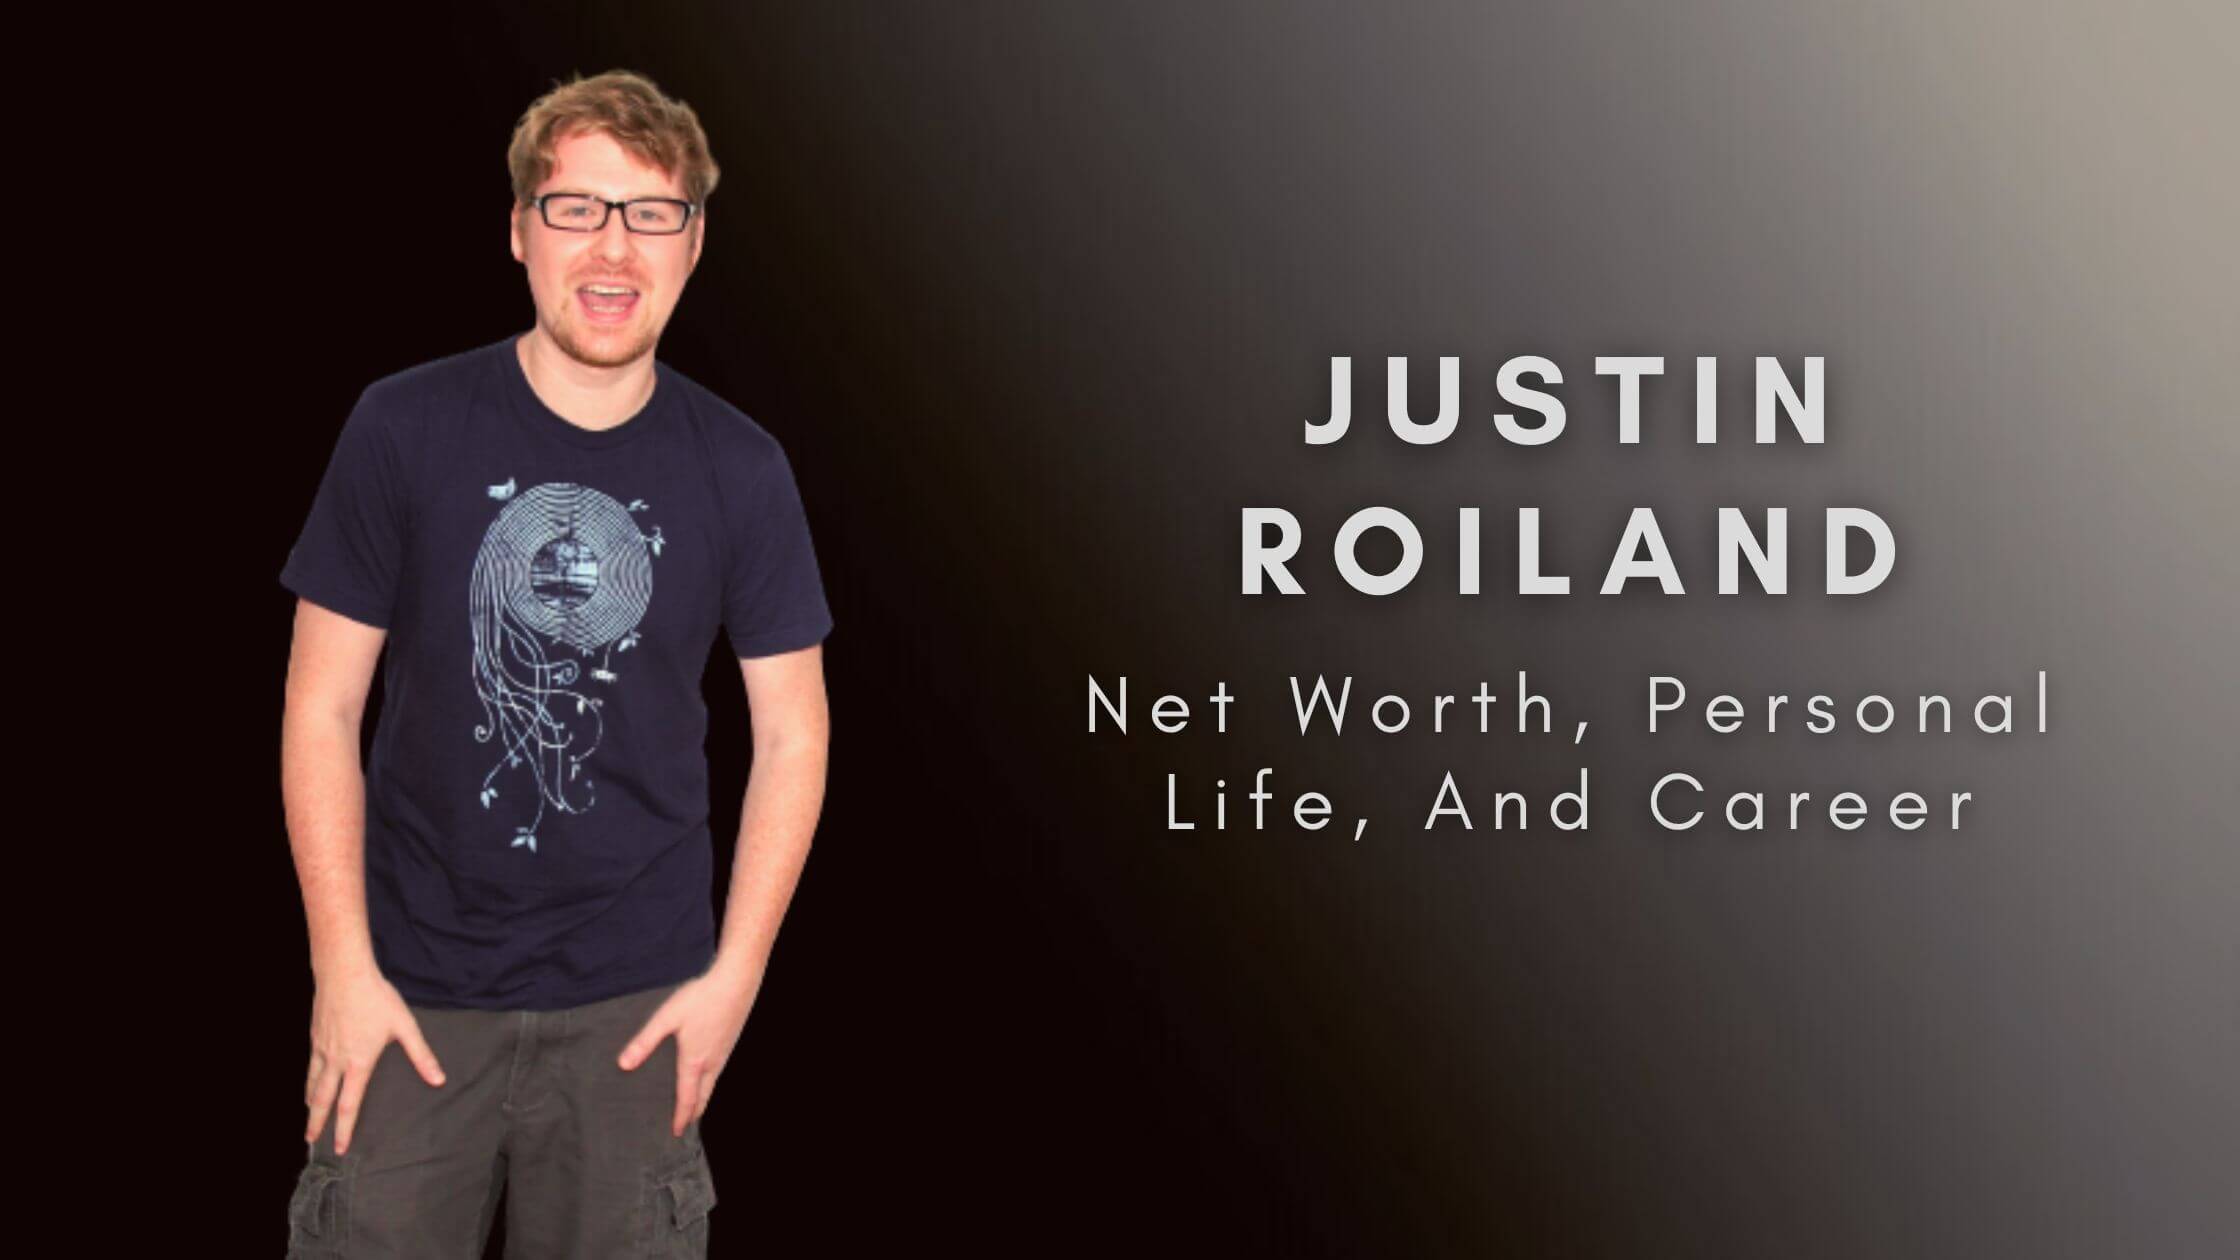 Who Is Justin Roiland His Net Worth, Personal Life, And Career